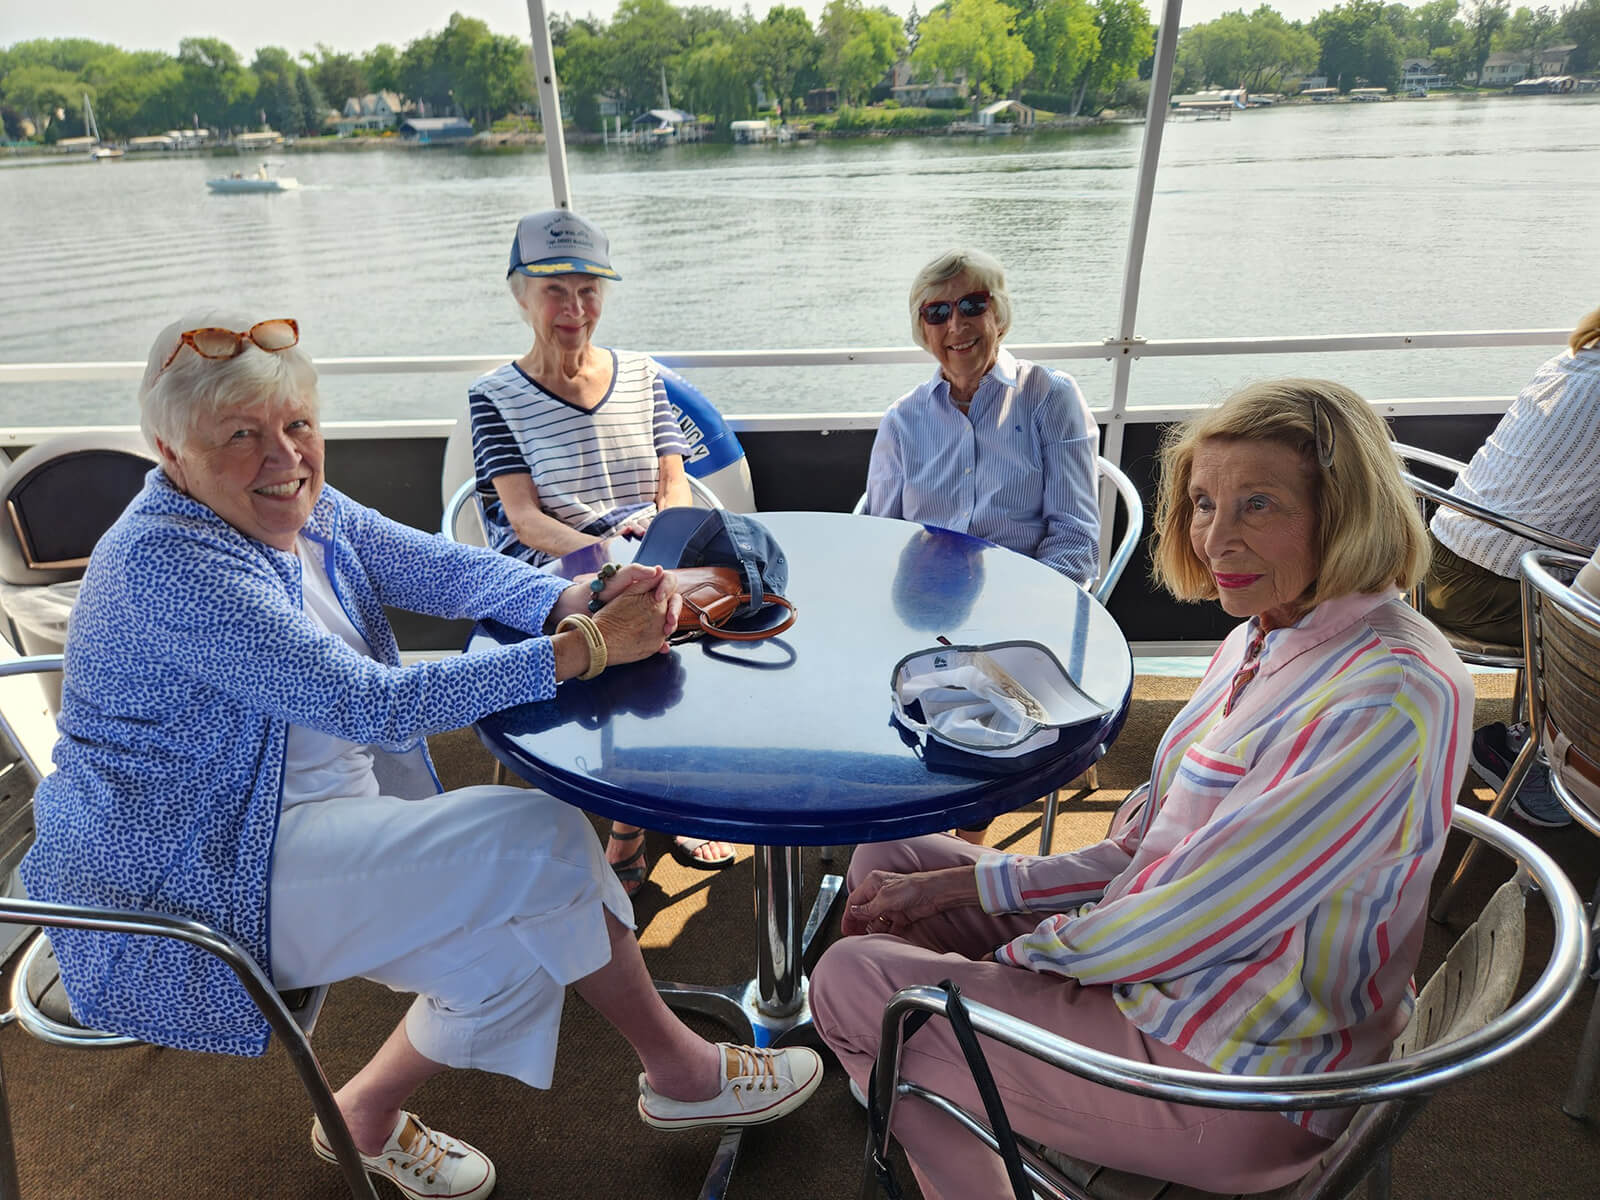 Residents of The Waters of Excelsior enjoying a scenic lake cruise, sharing smiles and conversation on a sunny day, encapsulating the vibrant senior lifestyle.